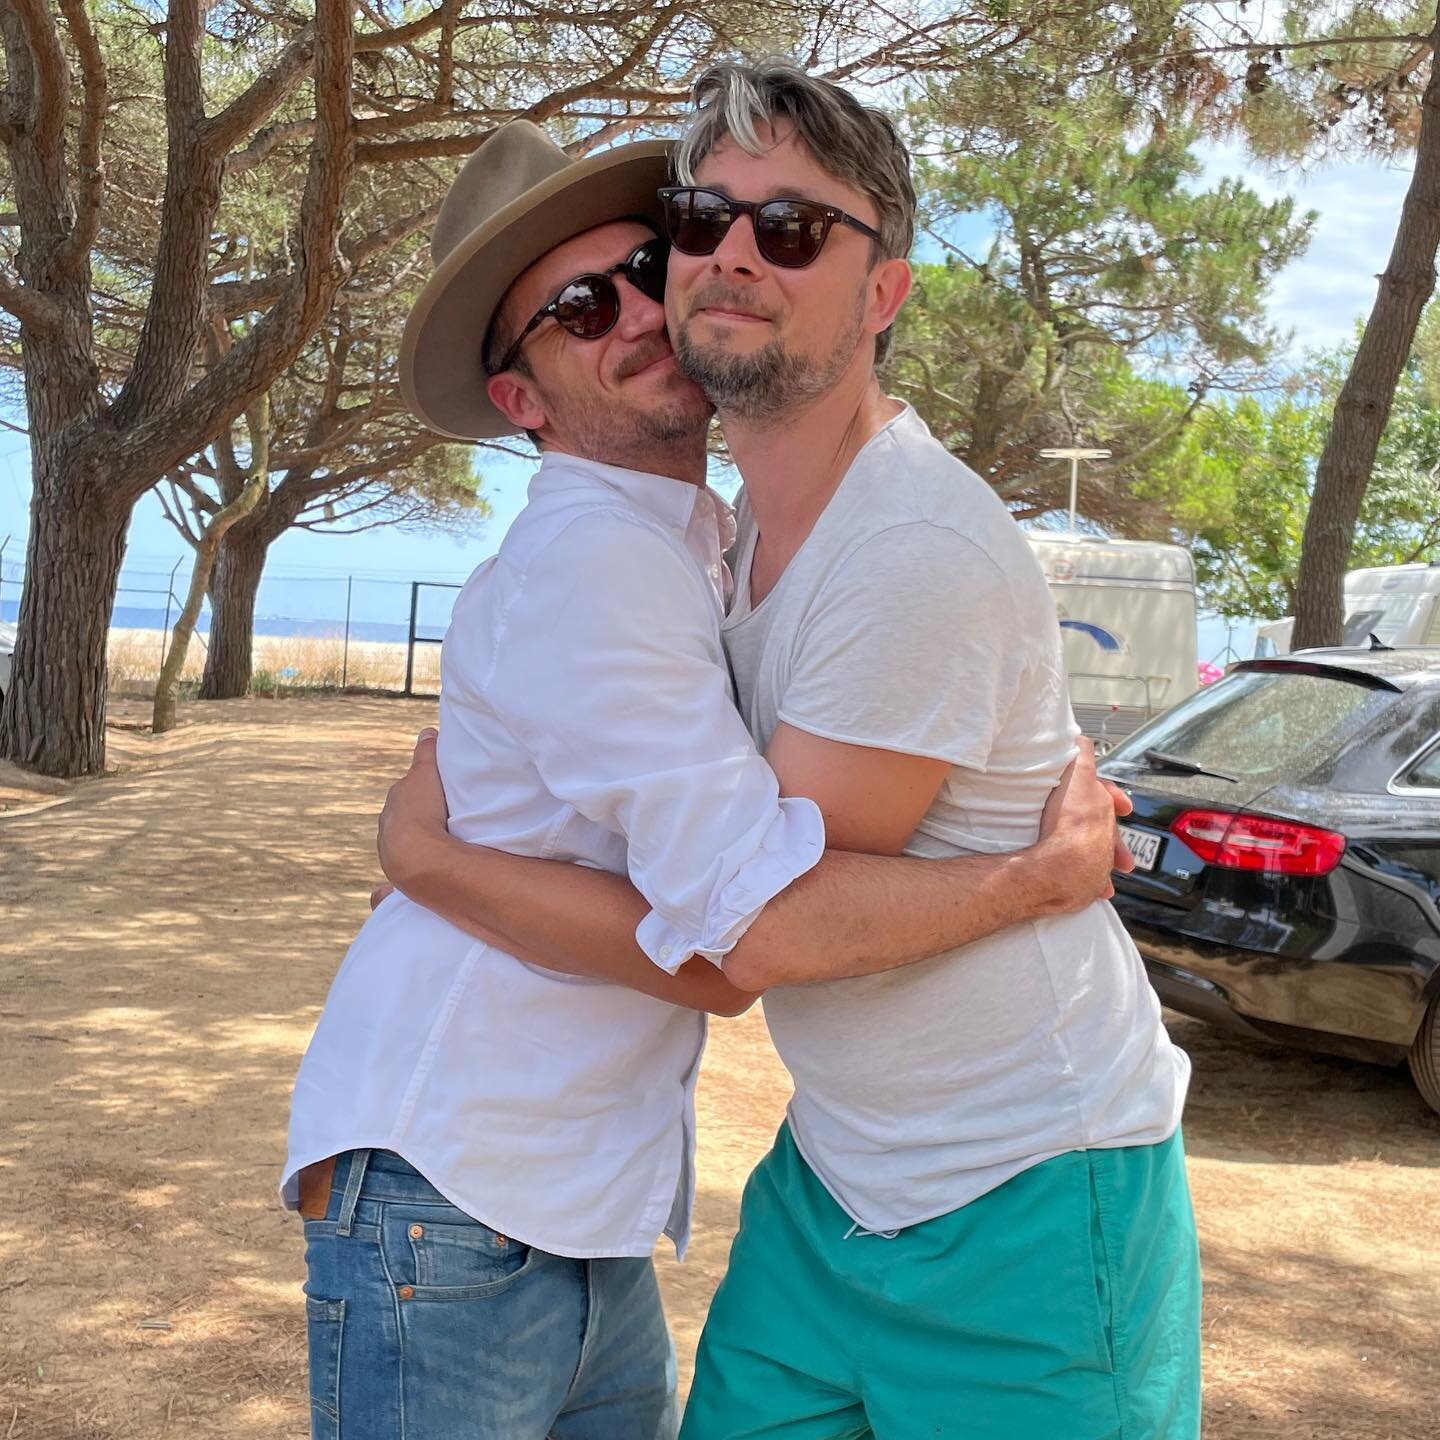 Spent the last 5 days in Platja w/ @chayadileni and reunited with my good friend Manu. We met as 2 year old toddlers on this exact campsite and remain friends to this day 😍 #friends #camping #costabrava